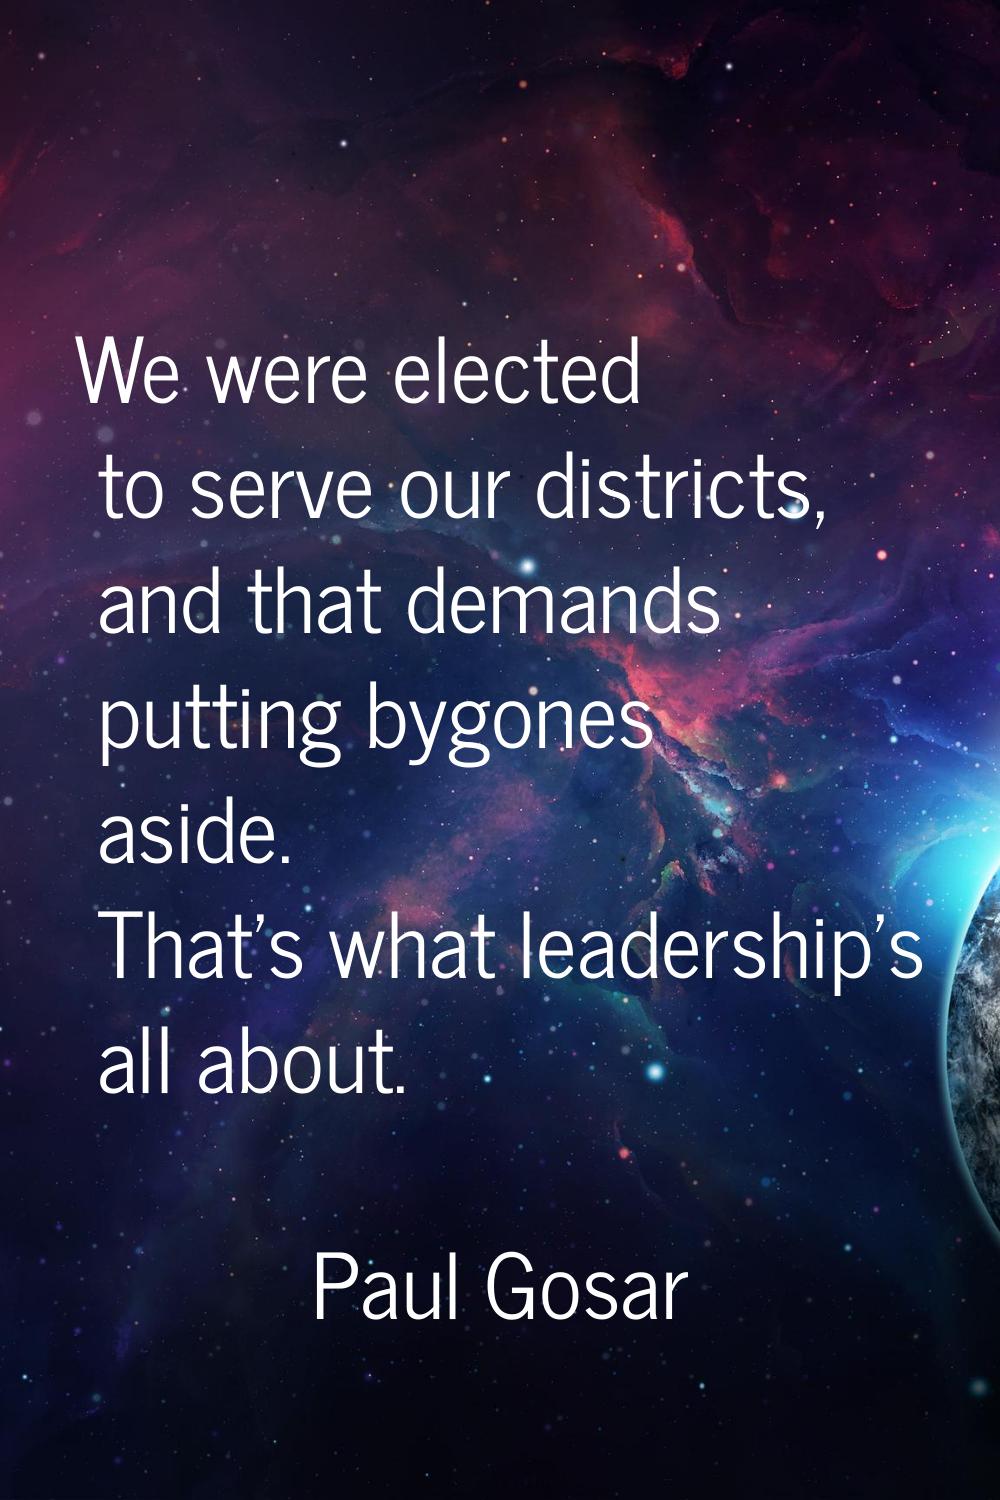 We were elected to serve our districts, and that demands putting bygones aside. That's what leaders